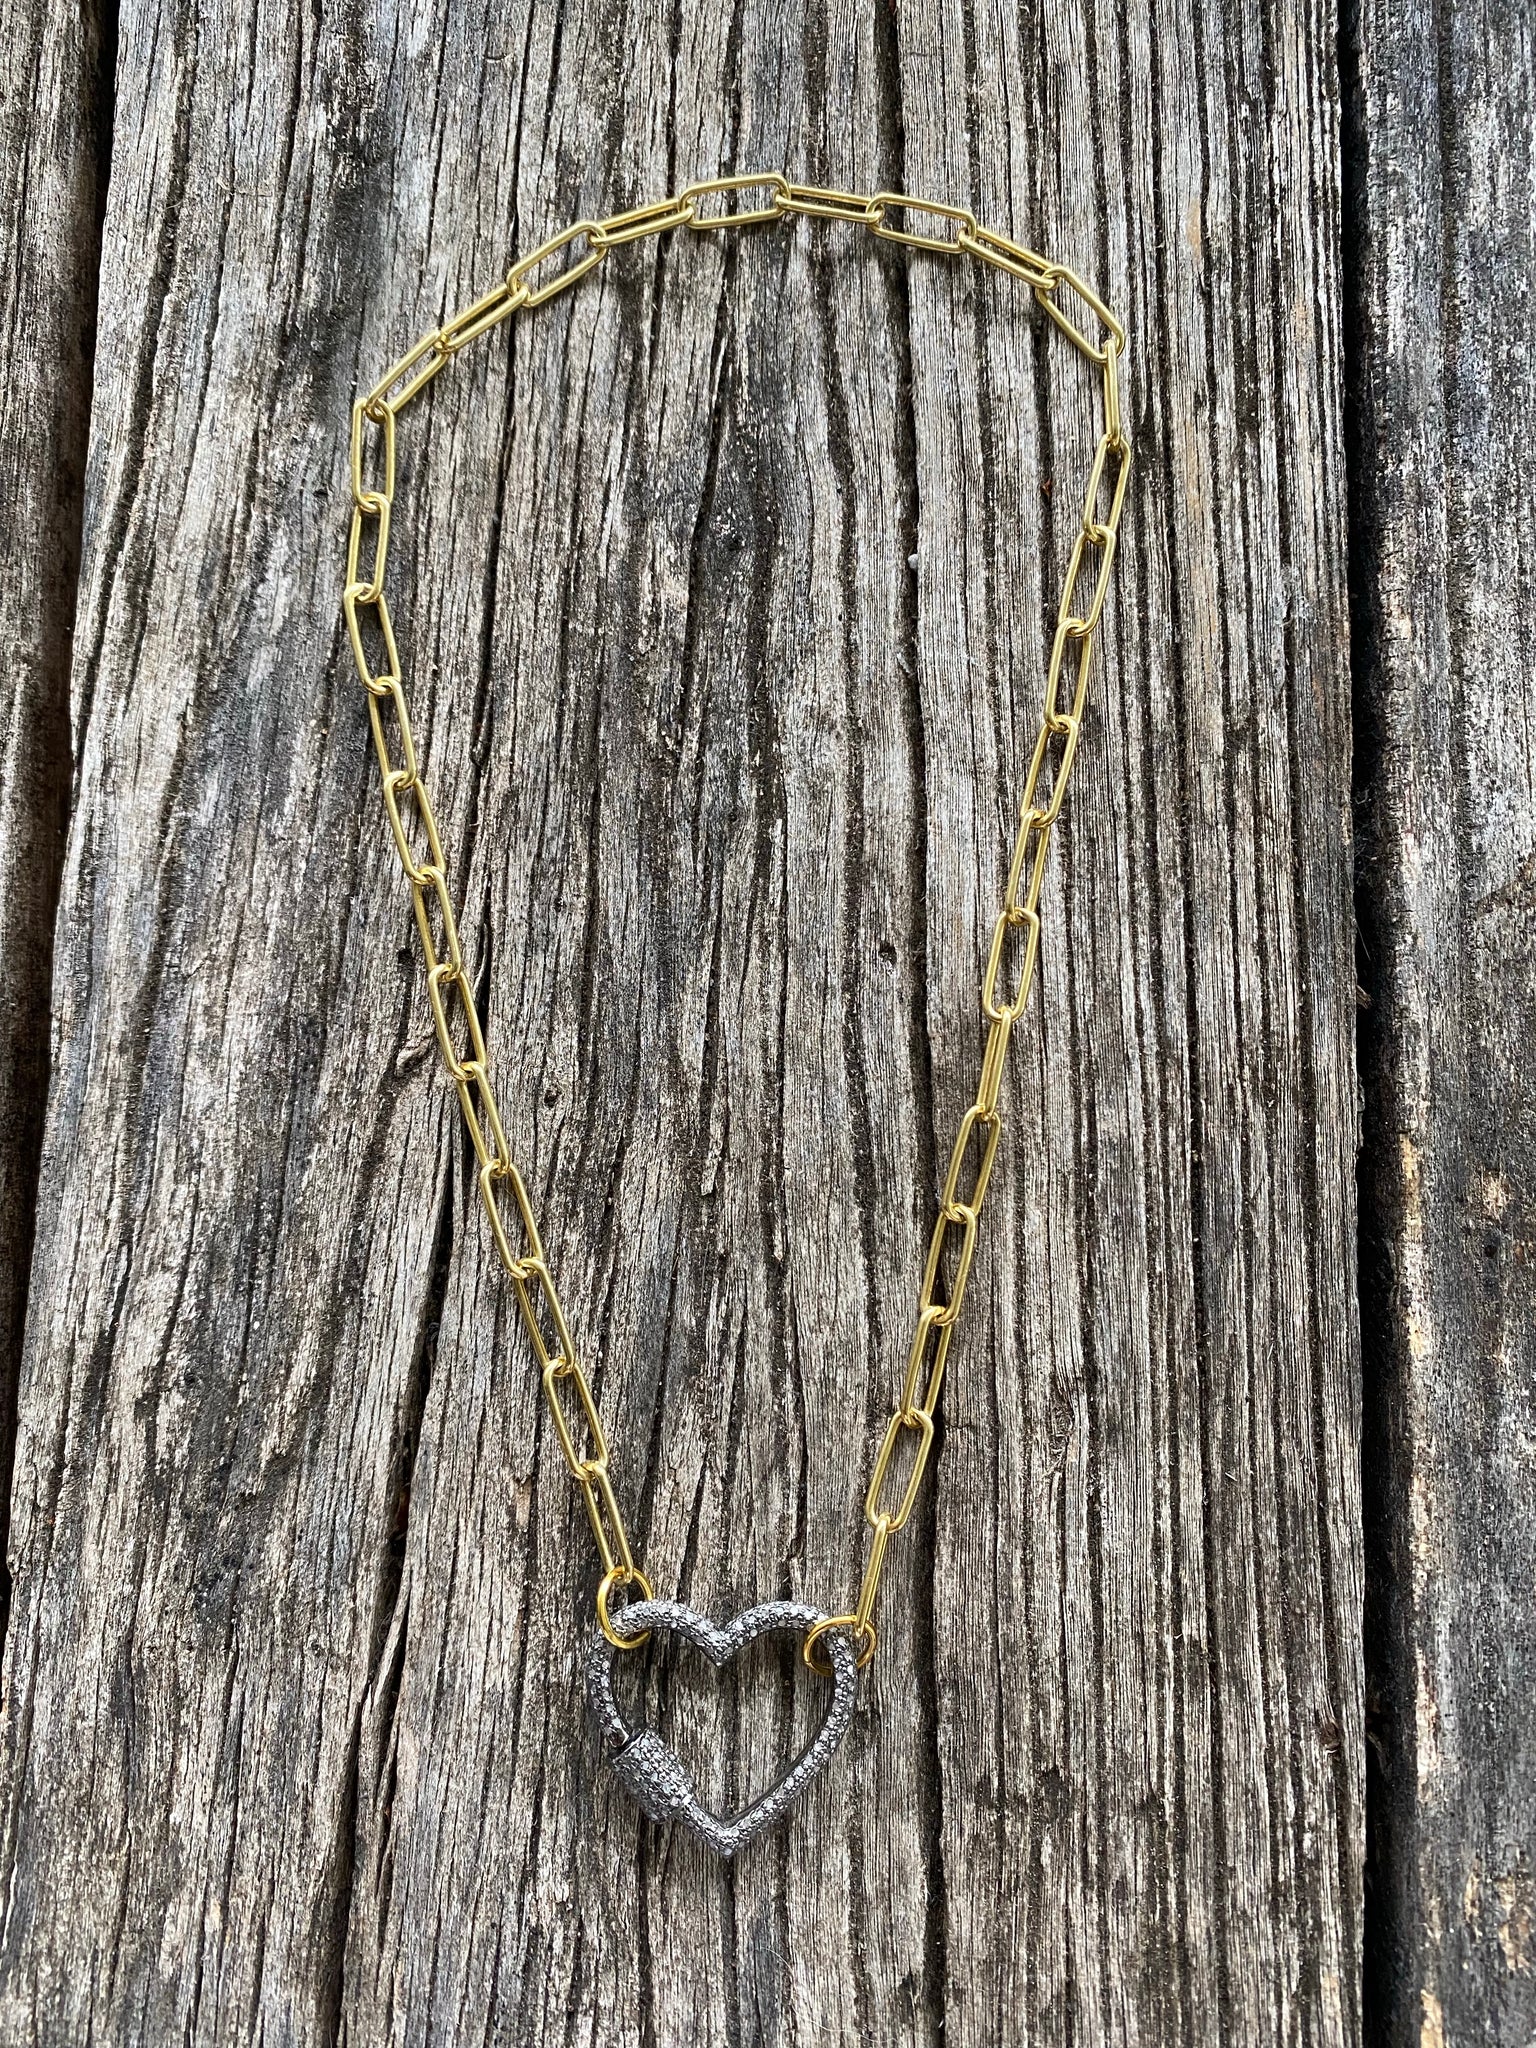 14K Yellow Gold Heart Carabiner Paperclip Necklace